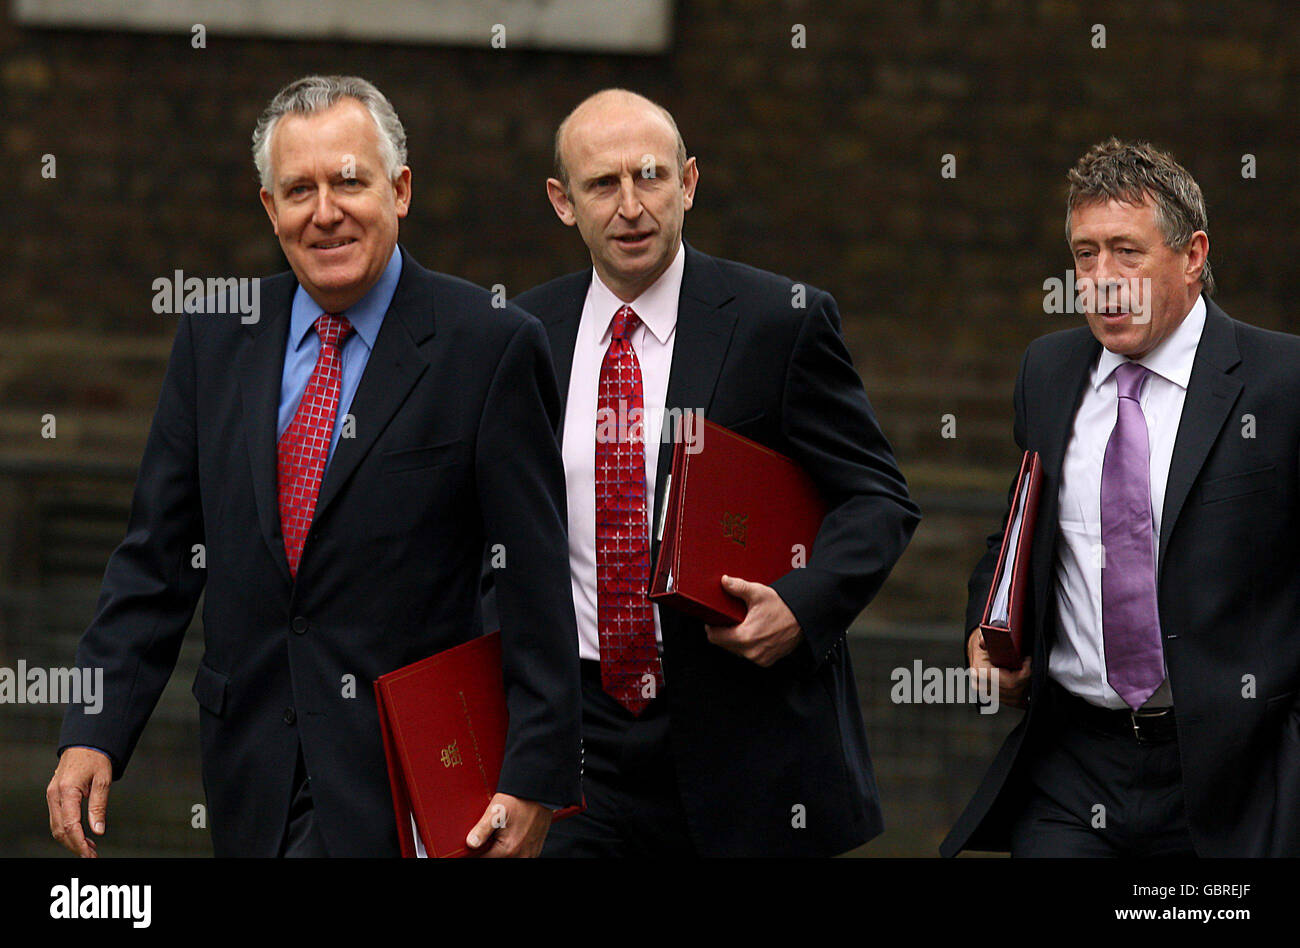 Welsh Secretary Peter Hain (left), Housing Minister for Communities and Local Government, John Healey (centre) and Secretary for Innovation, Universities and Skills John Denham arrive in Downing Street to attend the first Cabinet meeting since the reshuffle following last week's elections. Stock Photo